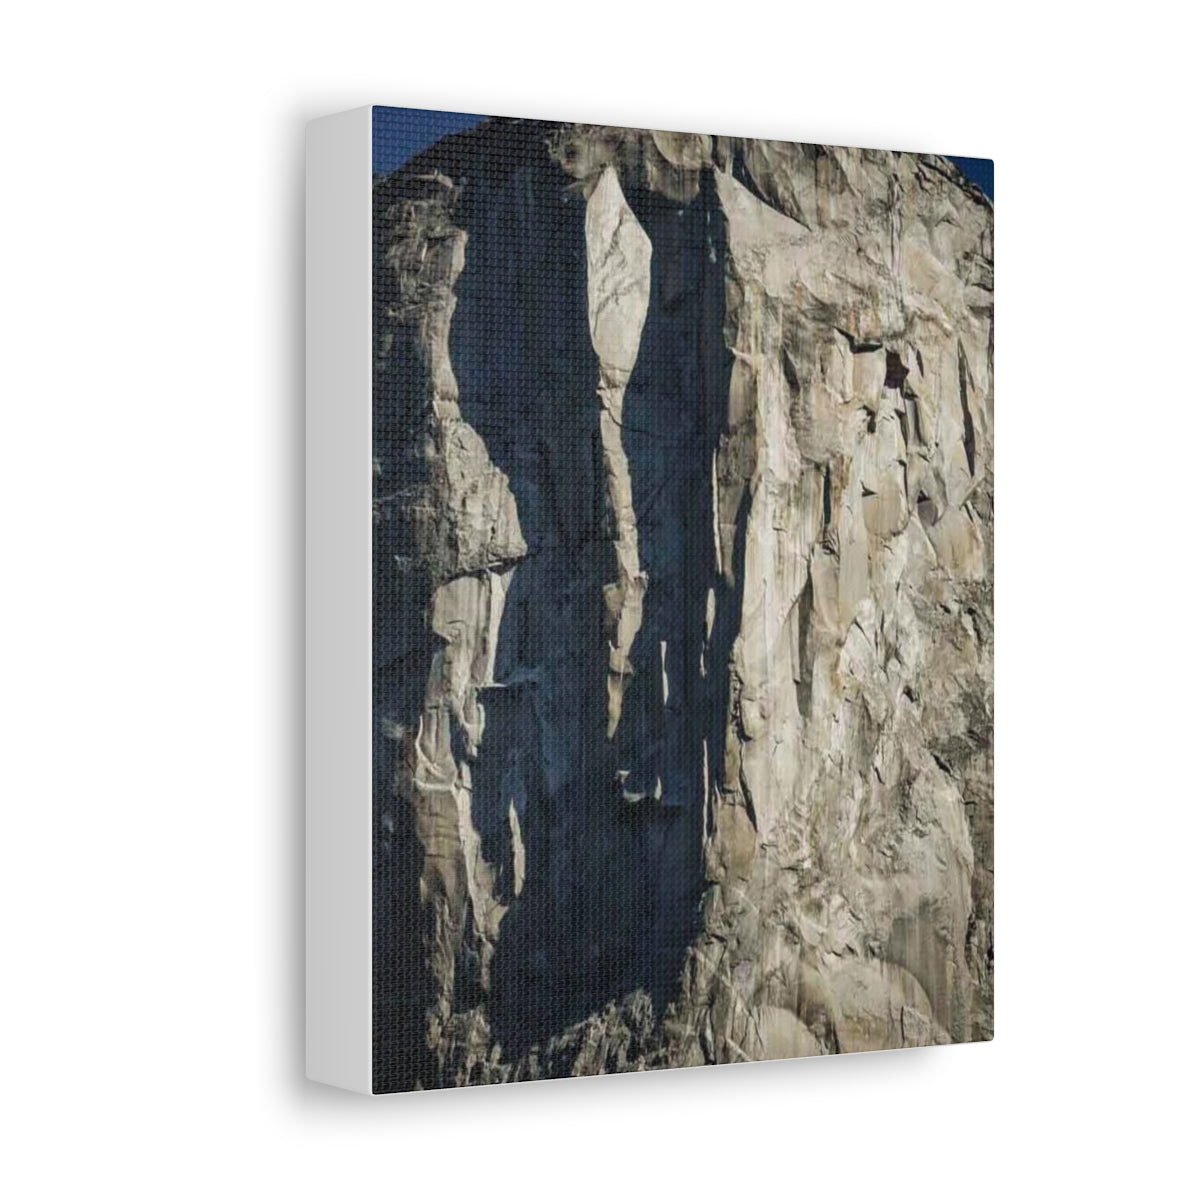 Photograph on Canvas of El Capitan, Satin Canvas, Stretched